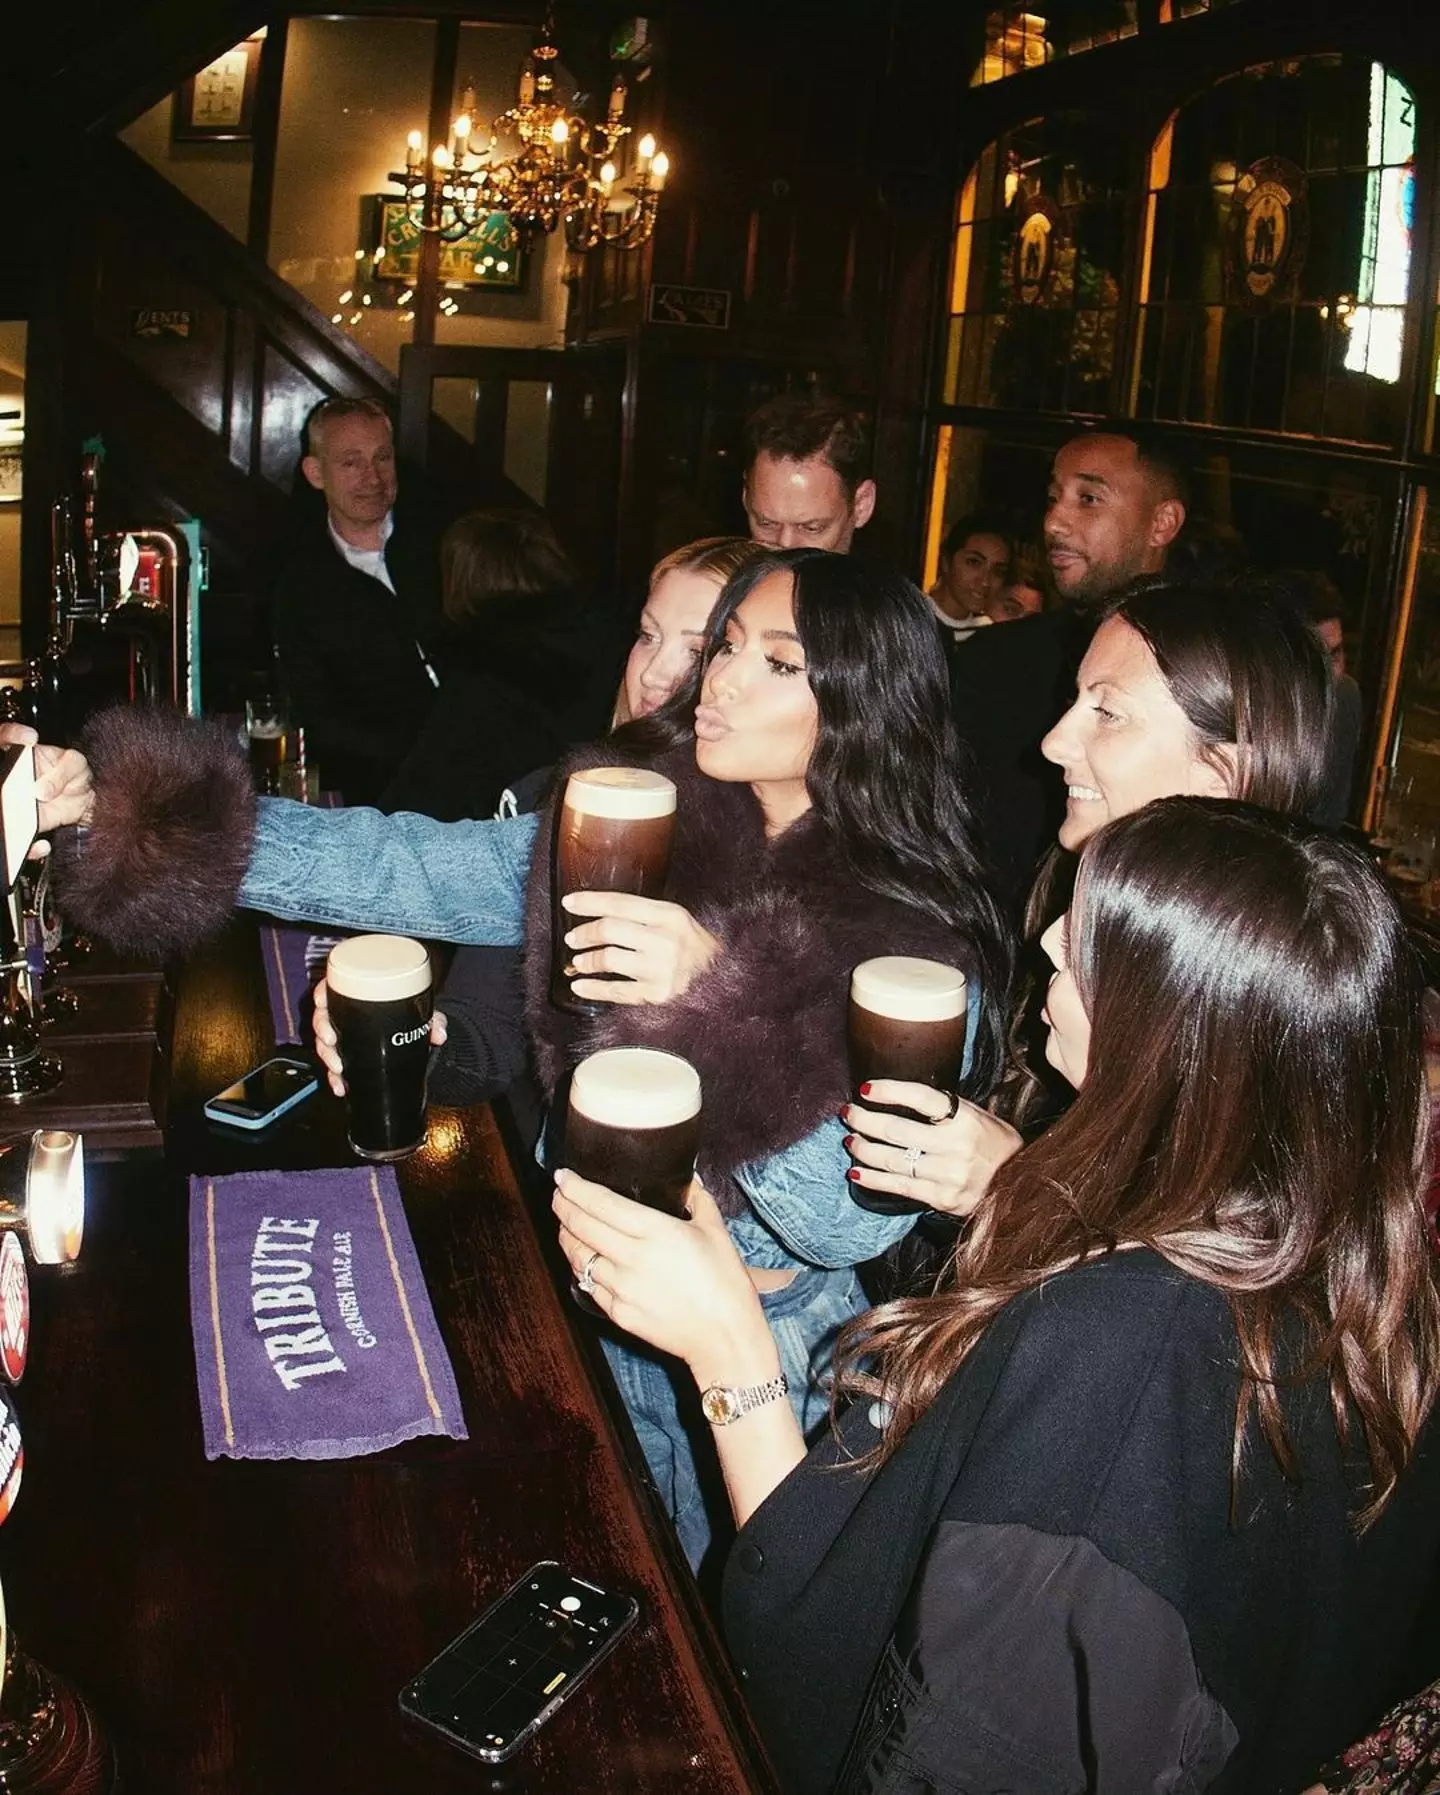 Fans reckon Kim was 'method acting' when she got the pint.